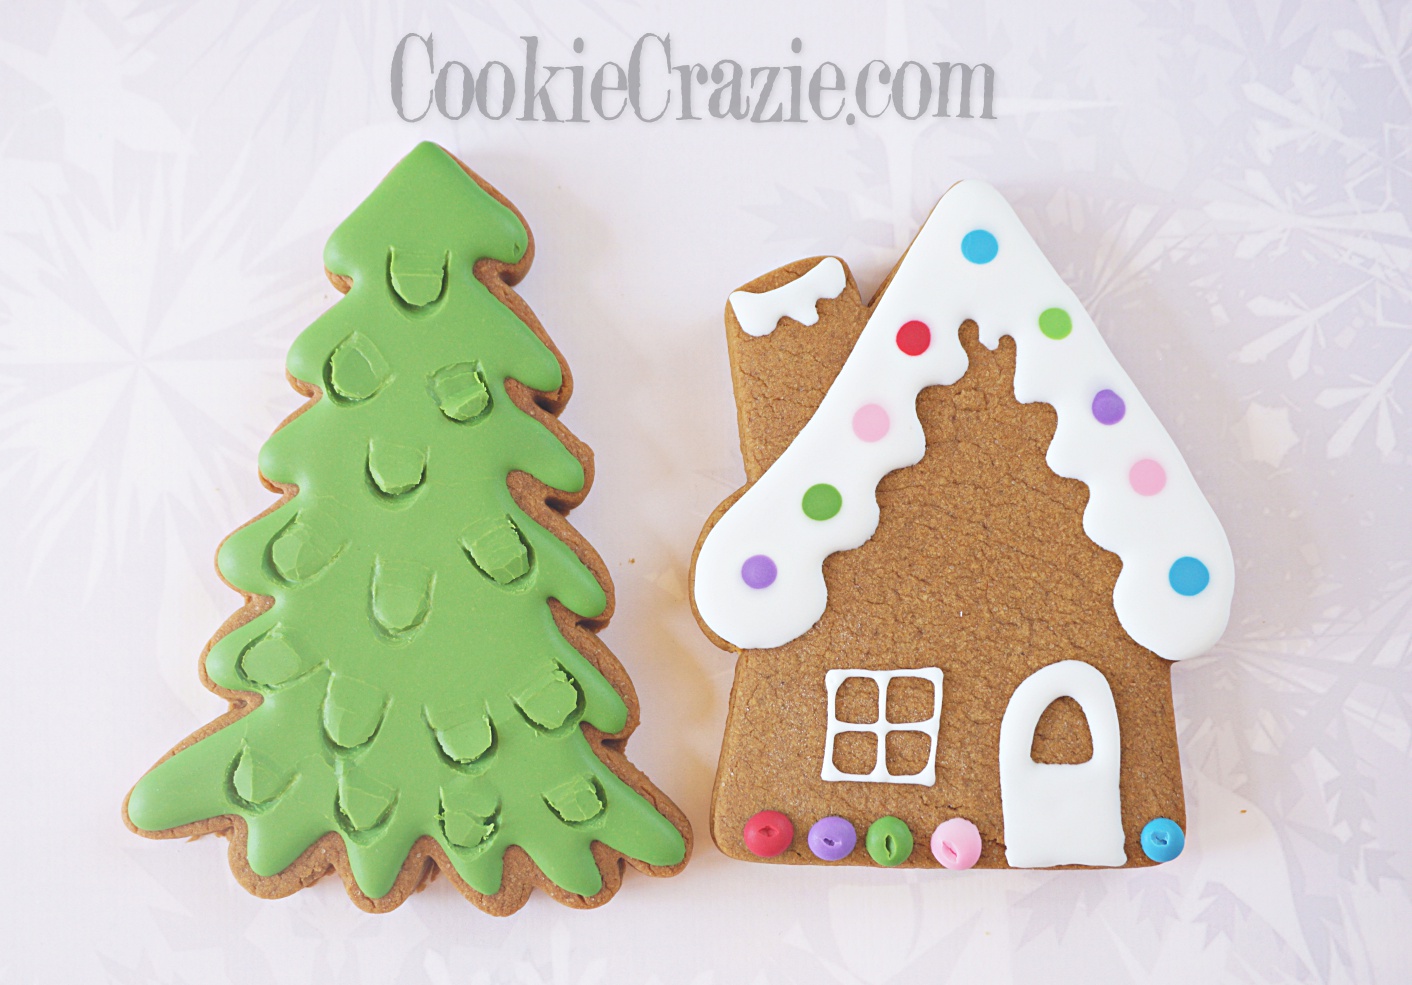  Christmas Evergreen Tree Decorated Sugar Cookie YouTube video  HERE  